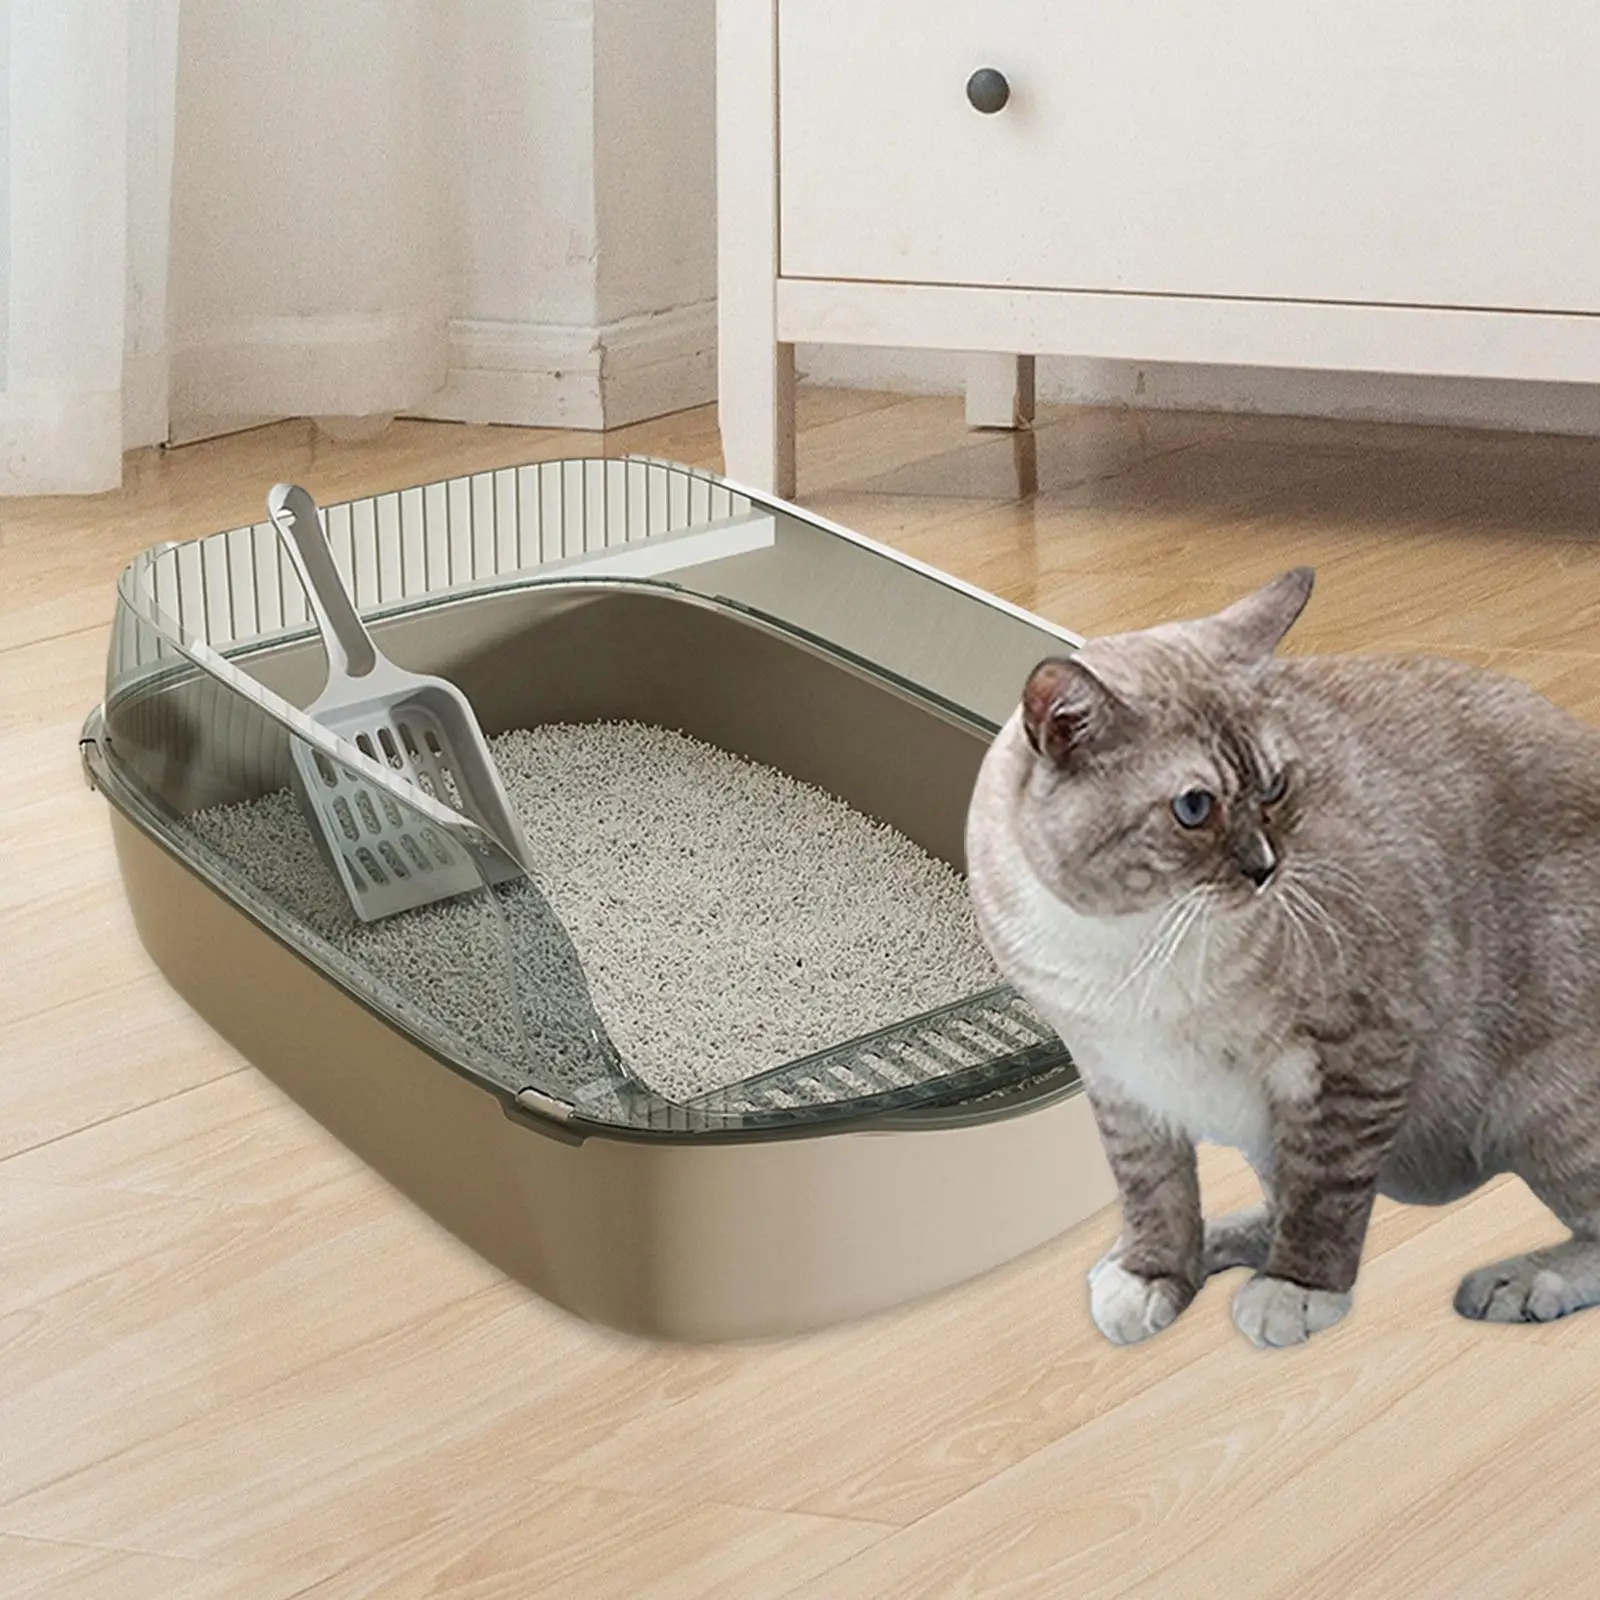 Open Top Cat Litter Box Cage Accessories Splashproof Toilette Sand Box Container Pets Litter Trays for Rabbit Hamsters Kitty